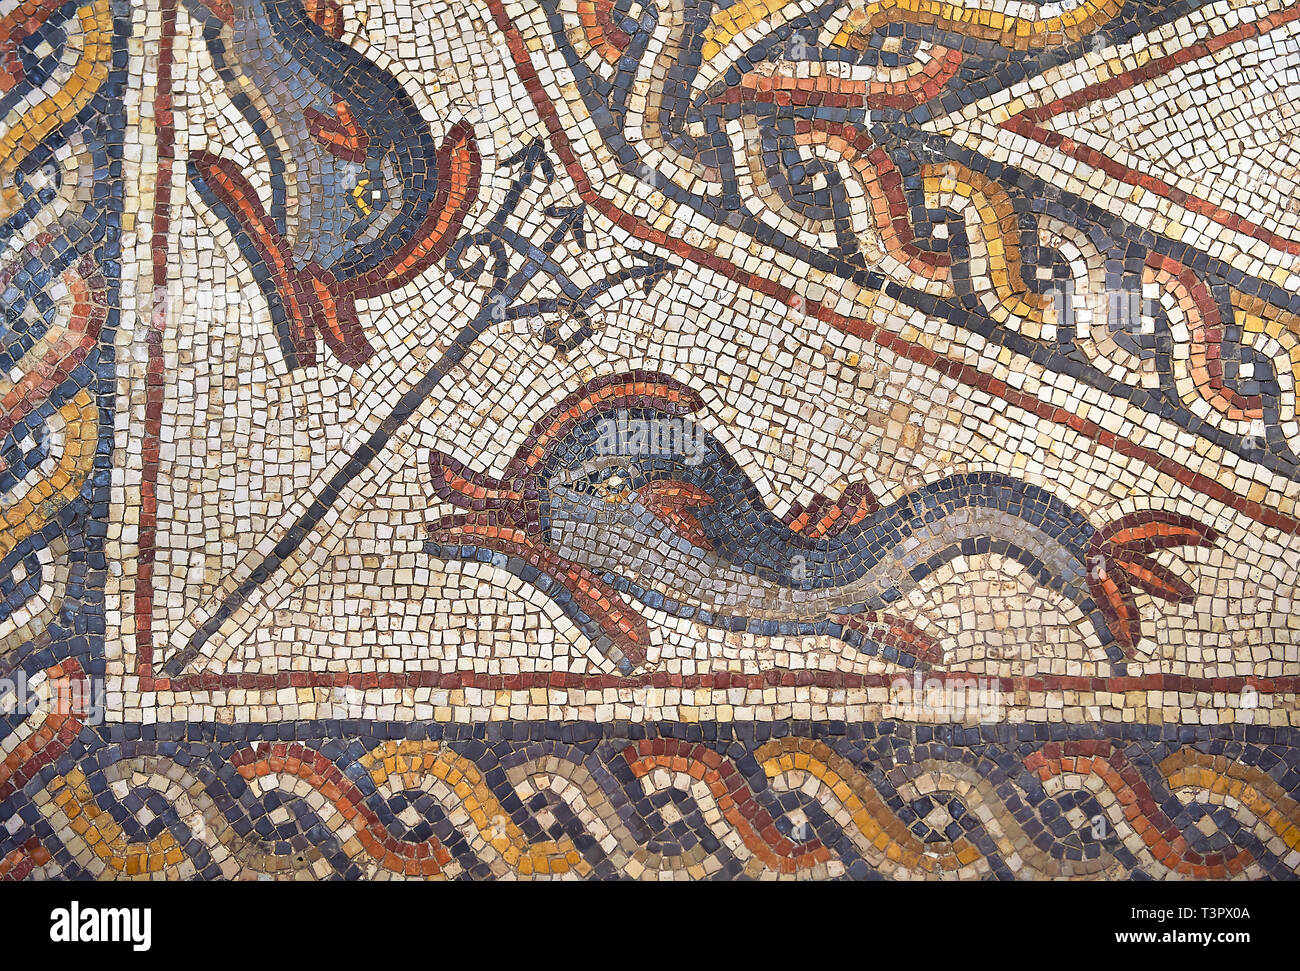 Fish from the 3rd century Roman mosaic villa floor from Lod, near Tel Aviv, Israel. The Roman floor mosaic of Lod is the largest and best preserved mo Stock Photo